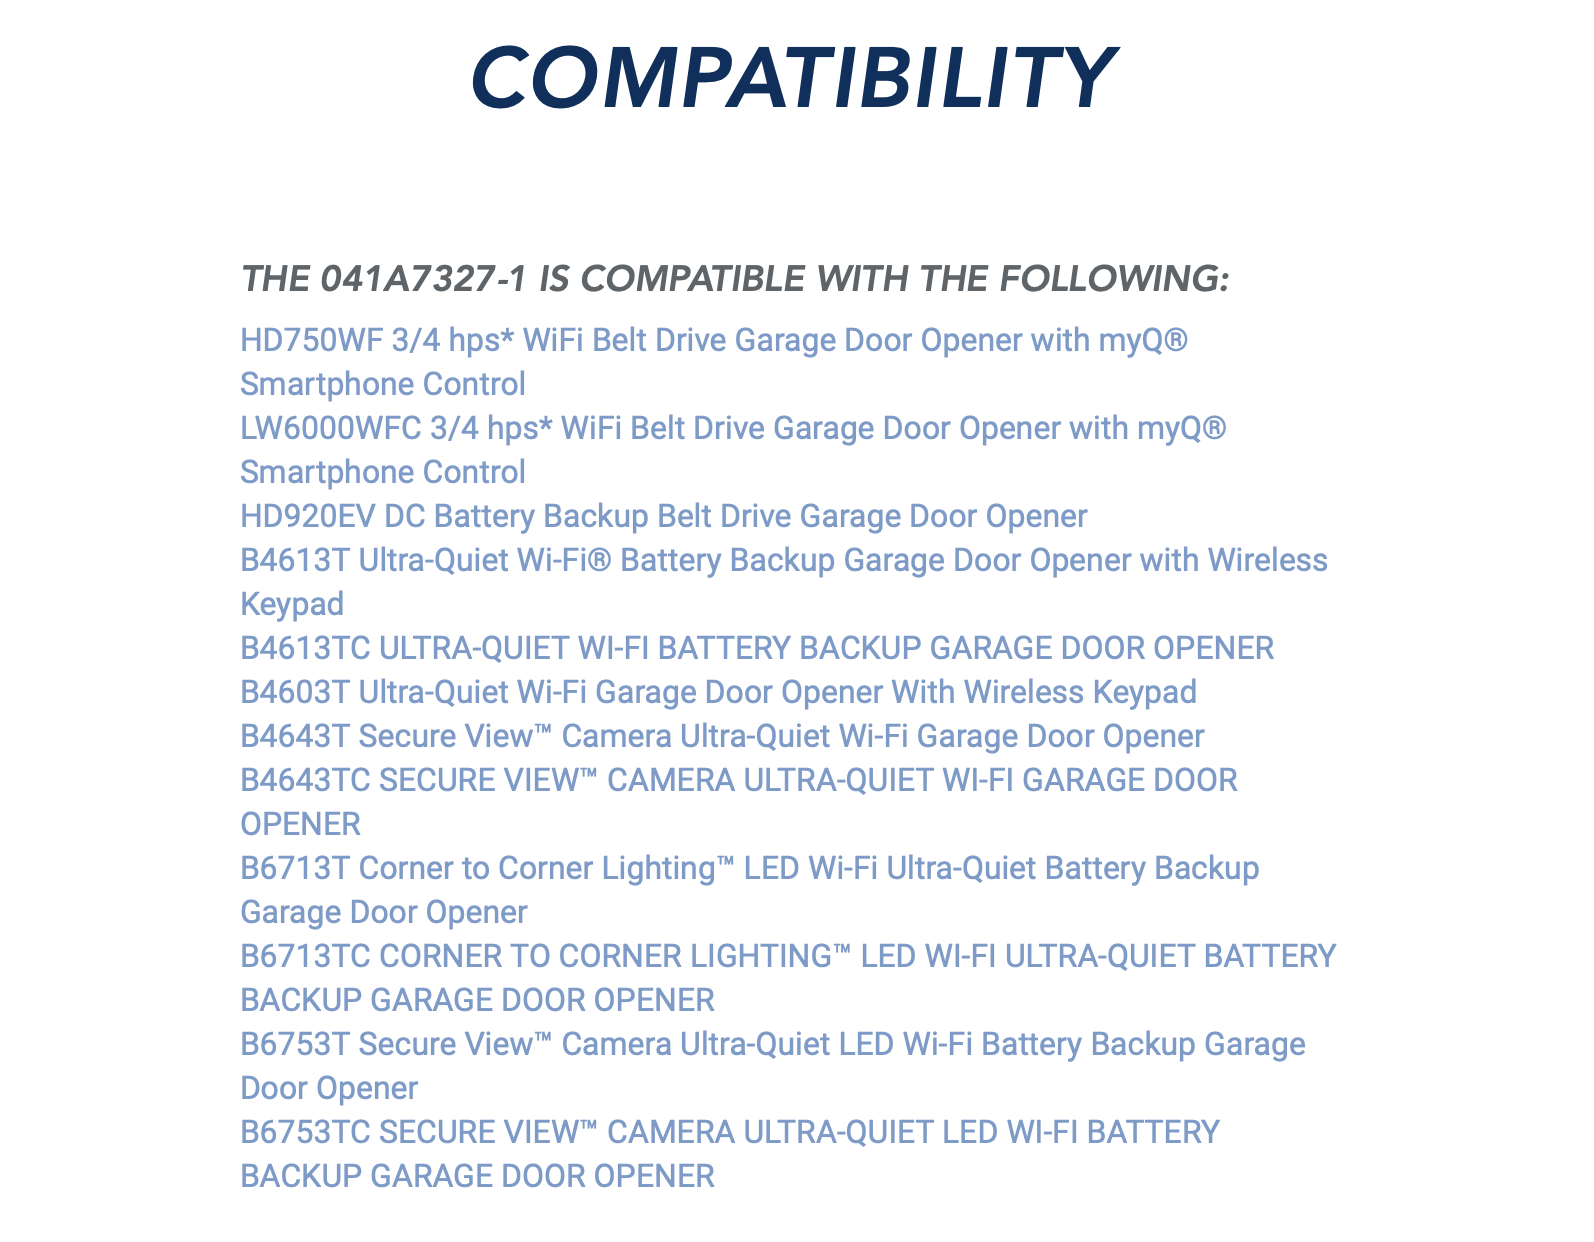 List of Chamberlain models compatible with the Chamberlain 041A7327-1 Timer to Close Control Panel.